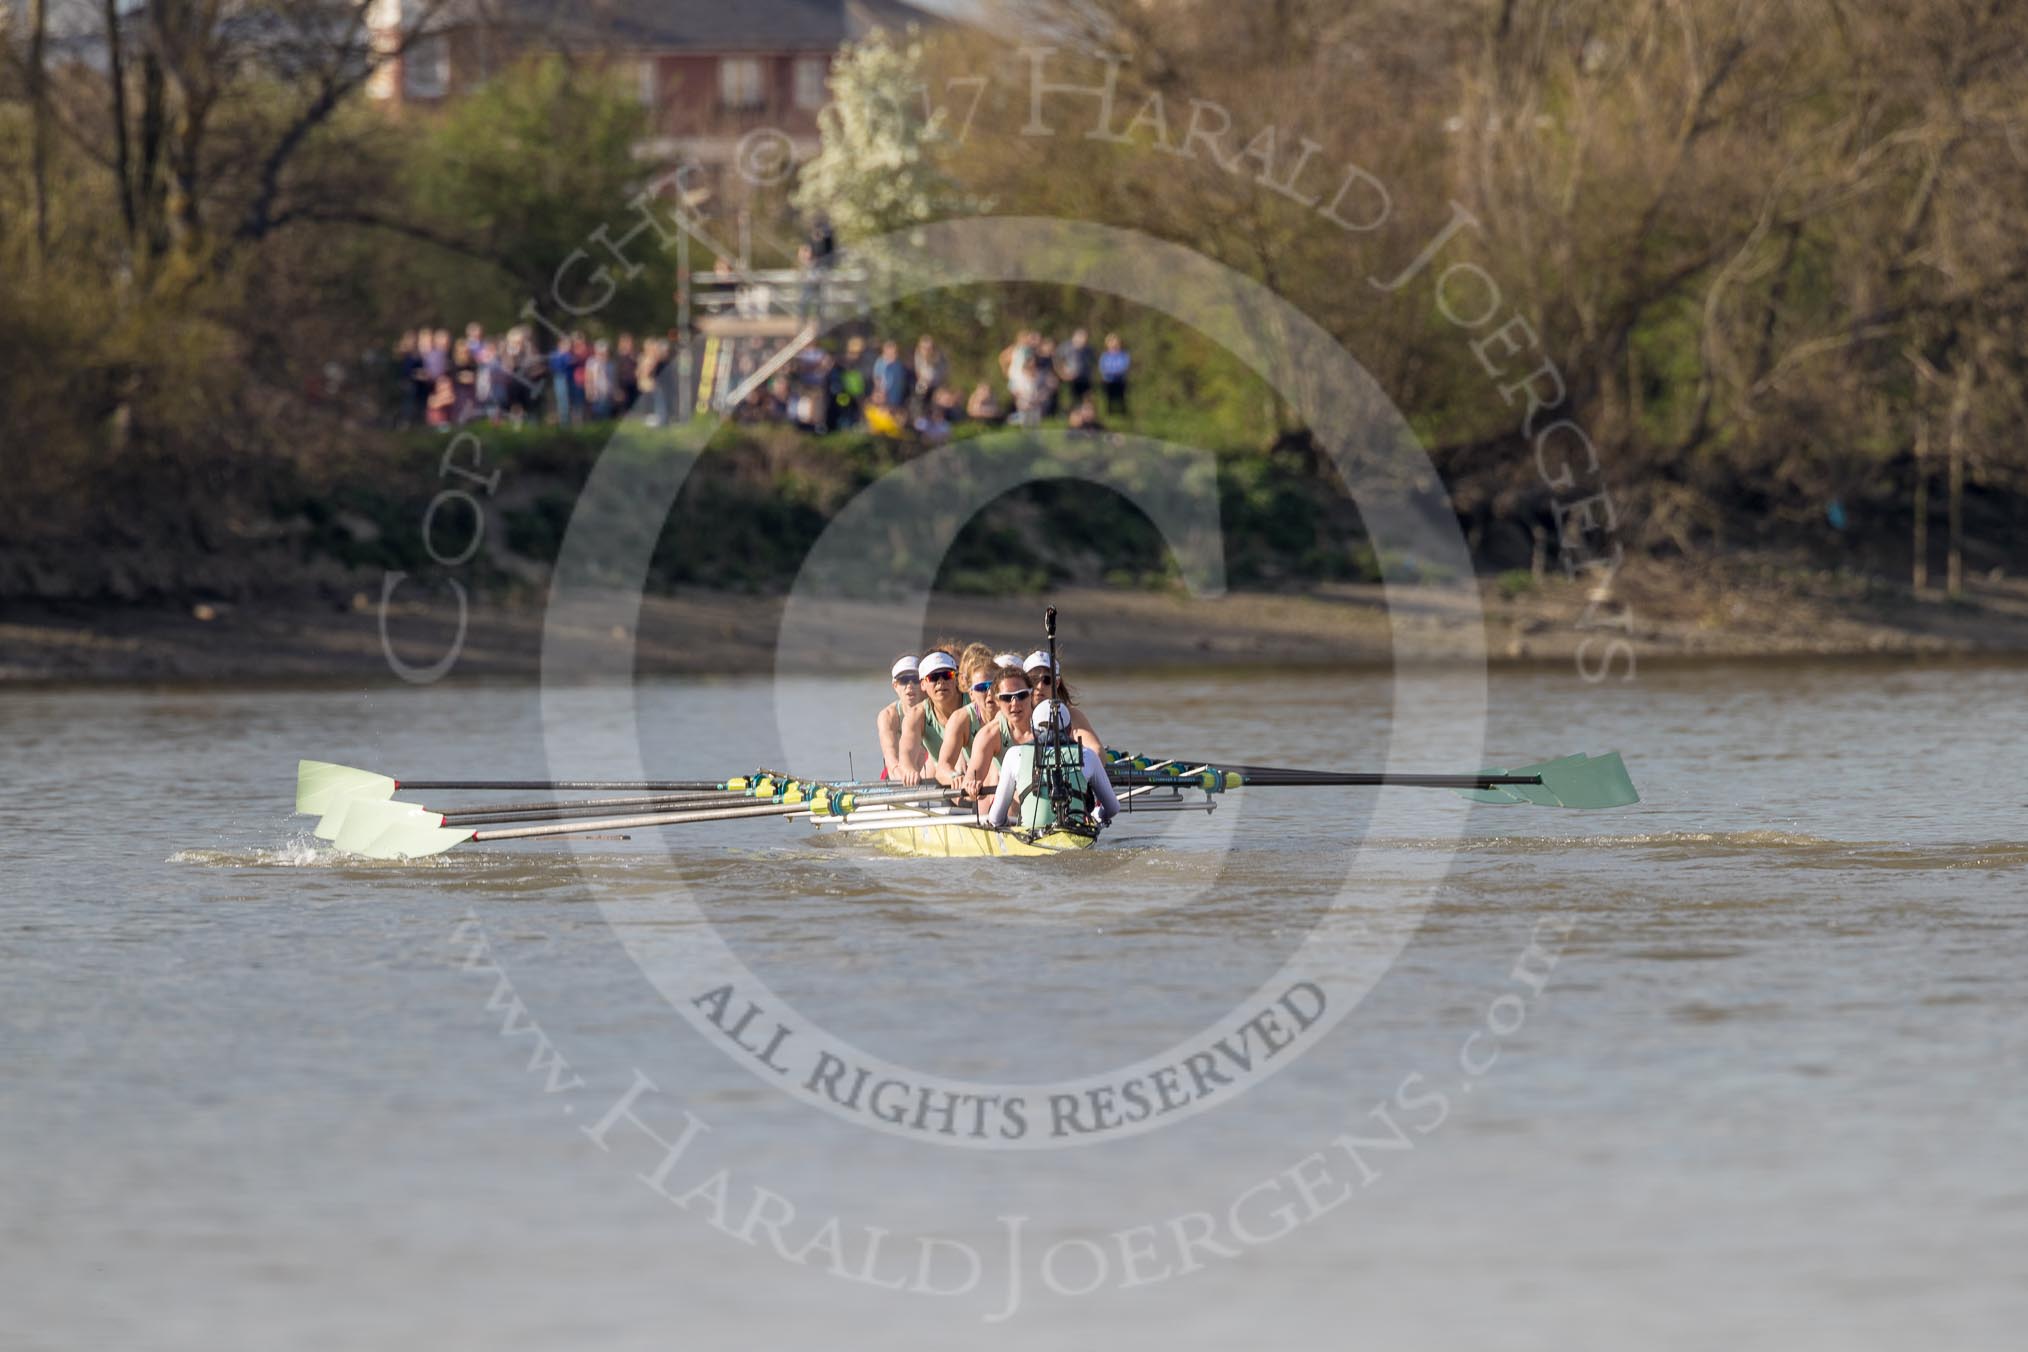 The Boat Race season 2017 -  The Cancer Research Women's Boat Race: The leading CUWBC boat approaching the Mile Post.
River Thames between Putney Bridge and Mortlake,
London SW15,

United Kingdom,
on 02 April 2017 at 16:38, image #139